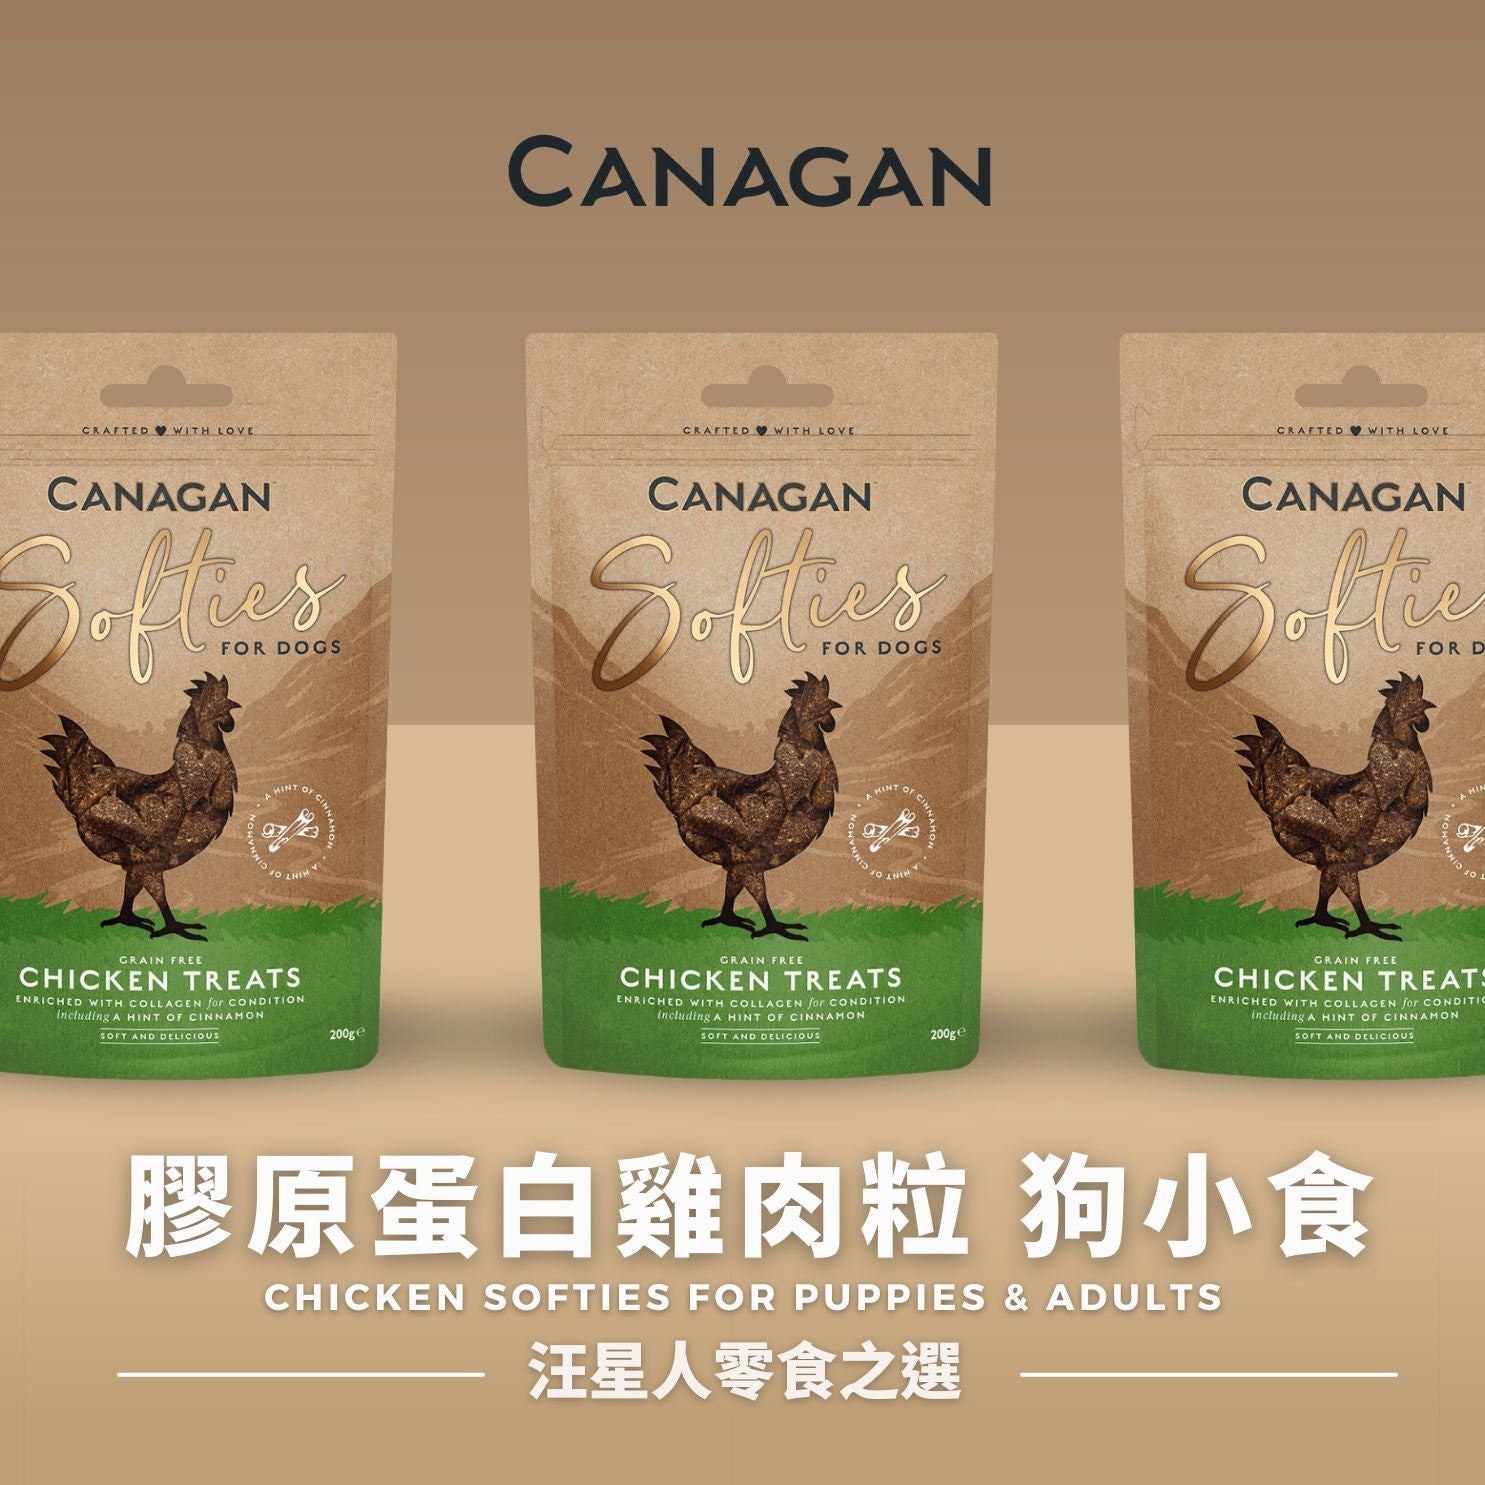 CANAGAN Softies for puppies & adults | 膠原蛋白狗小食